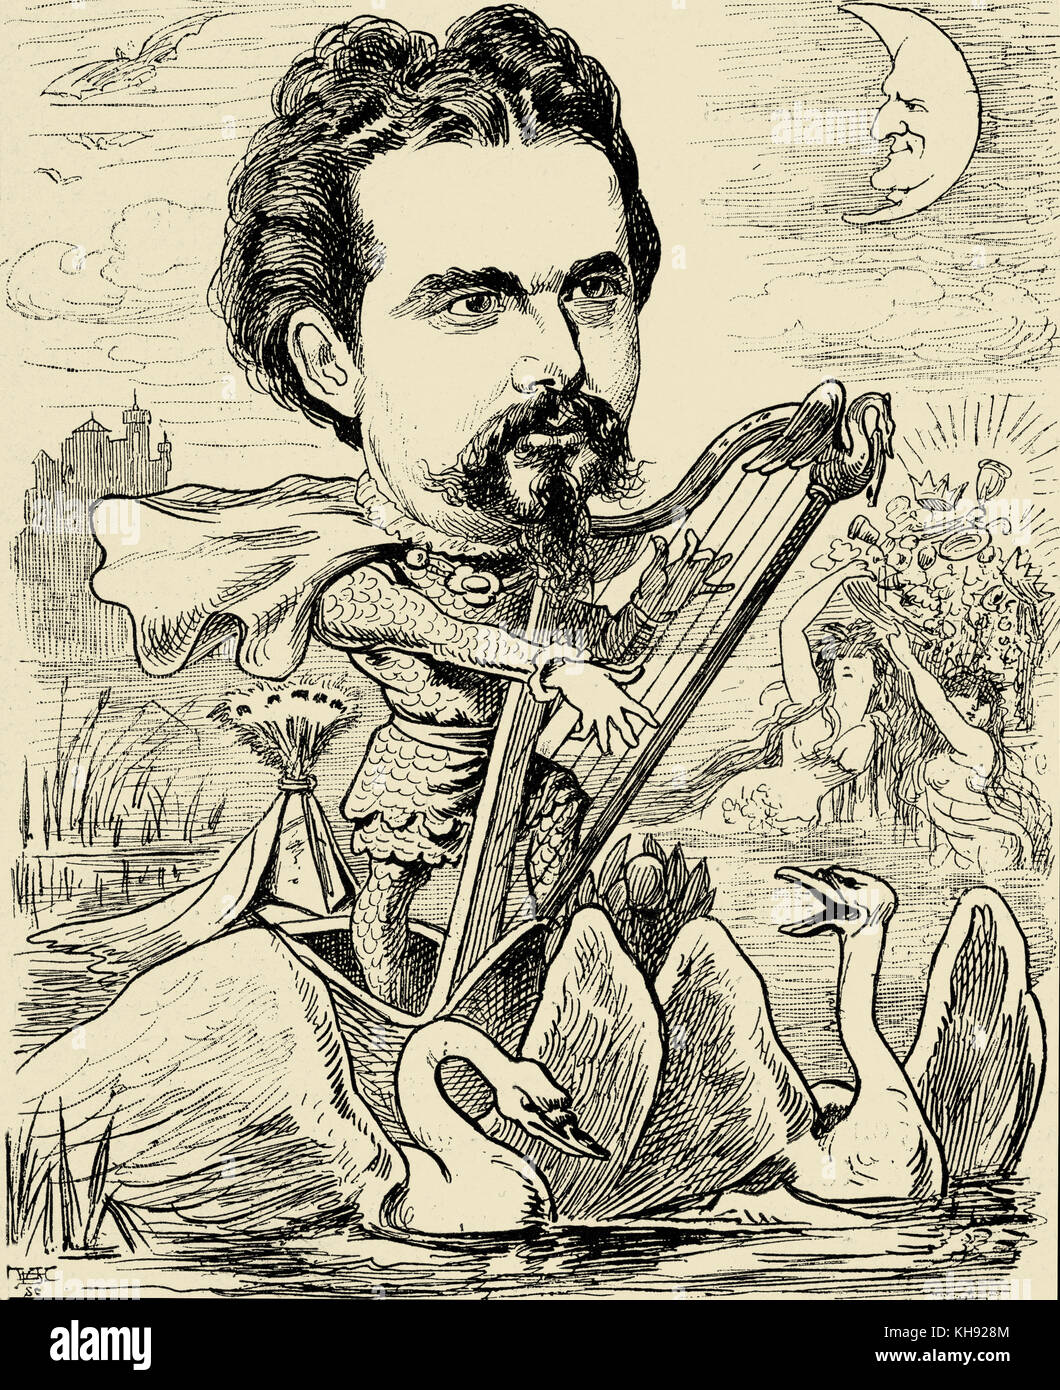 Ludwig II of Bavaria: 'Lohengrin King' - caricature published in 'Der Floh', 30 August 1885.  Known as the Swan King. 25 August 1845  – 13 June 1886. Wagner connection. Stock Photo